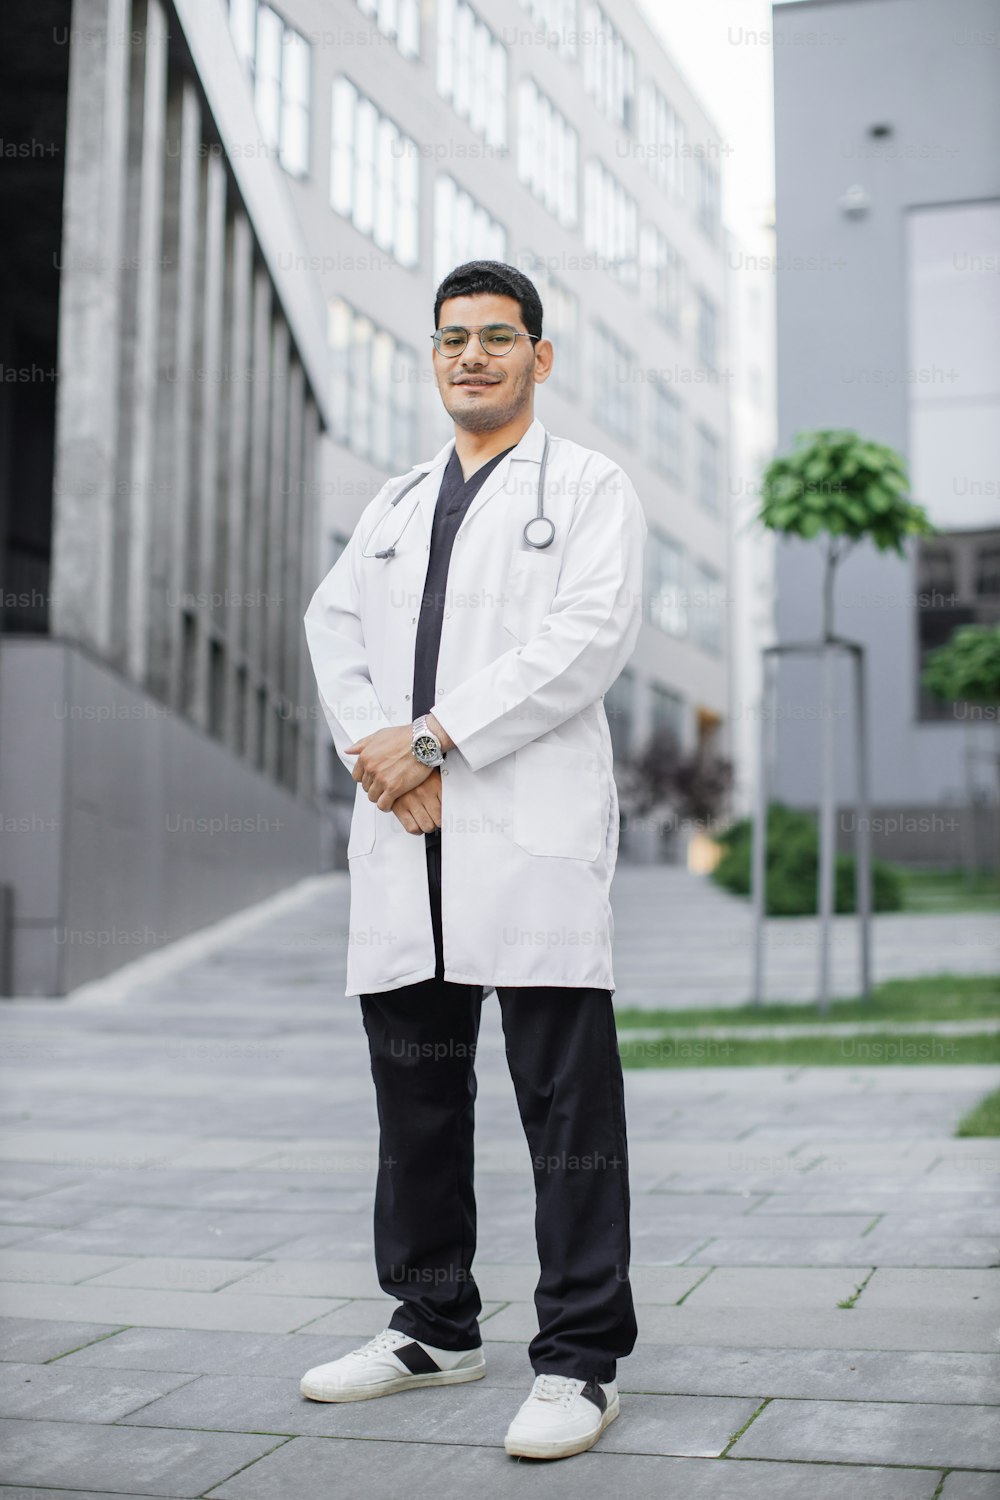 A young handsome Saudi Arabian male doctor smiling outside hospital. Full length portrait of male medical student in white coat, posing in front of modern university building or clinic